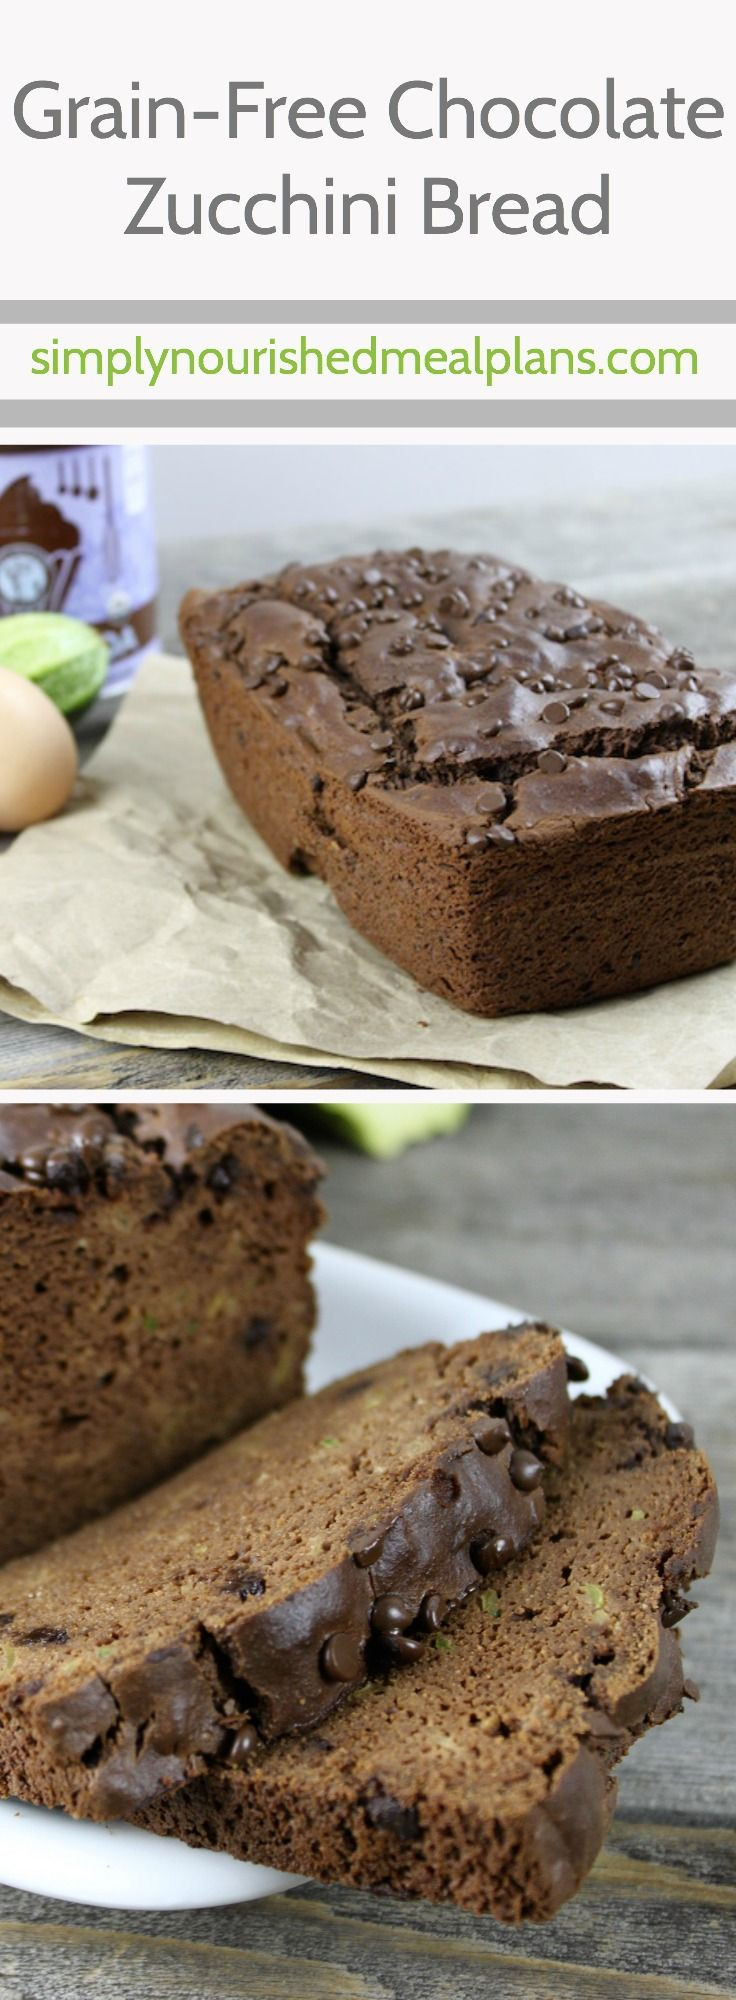 How To Make Grain Free Bread
 A rich chocolatey grain free bread made with coconut